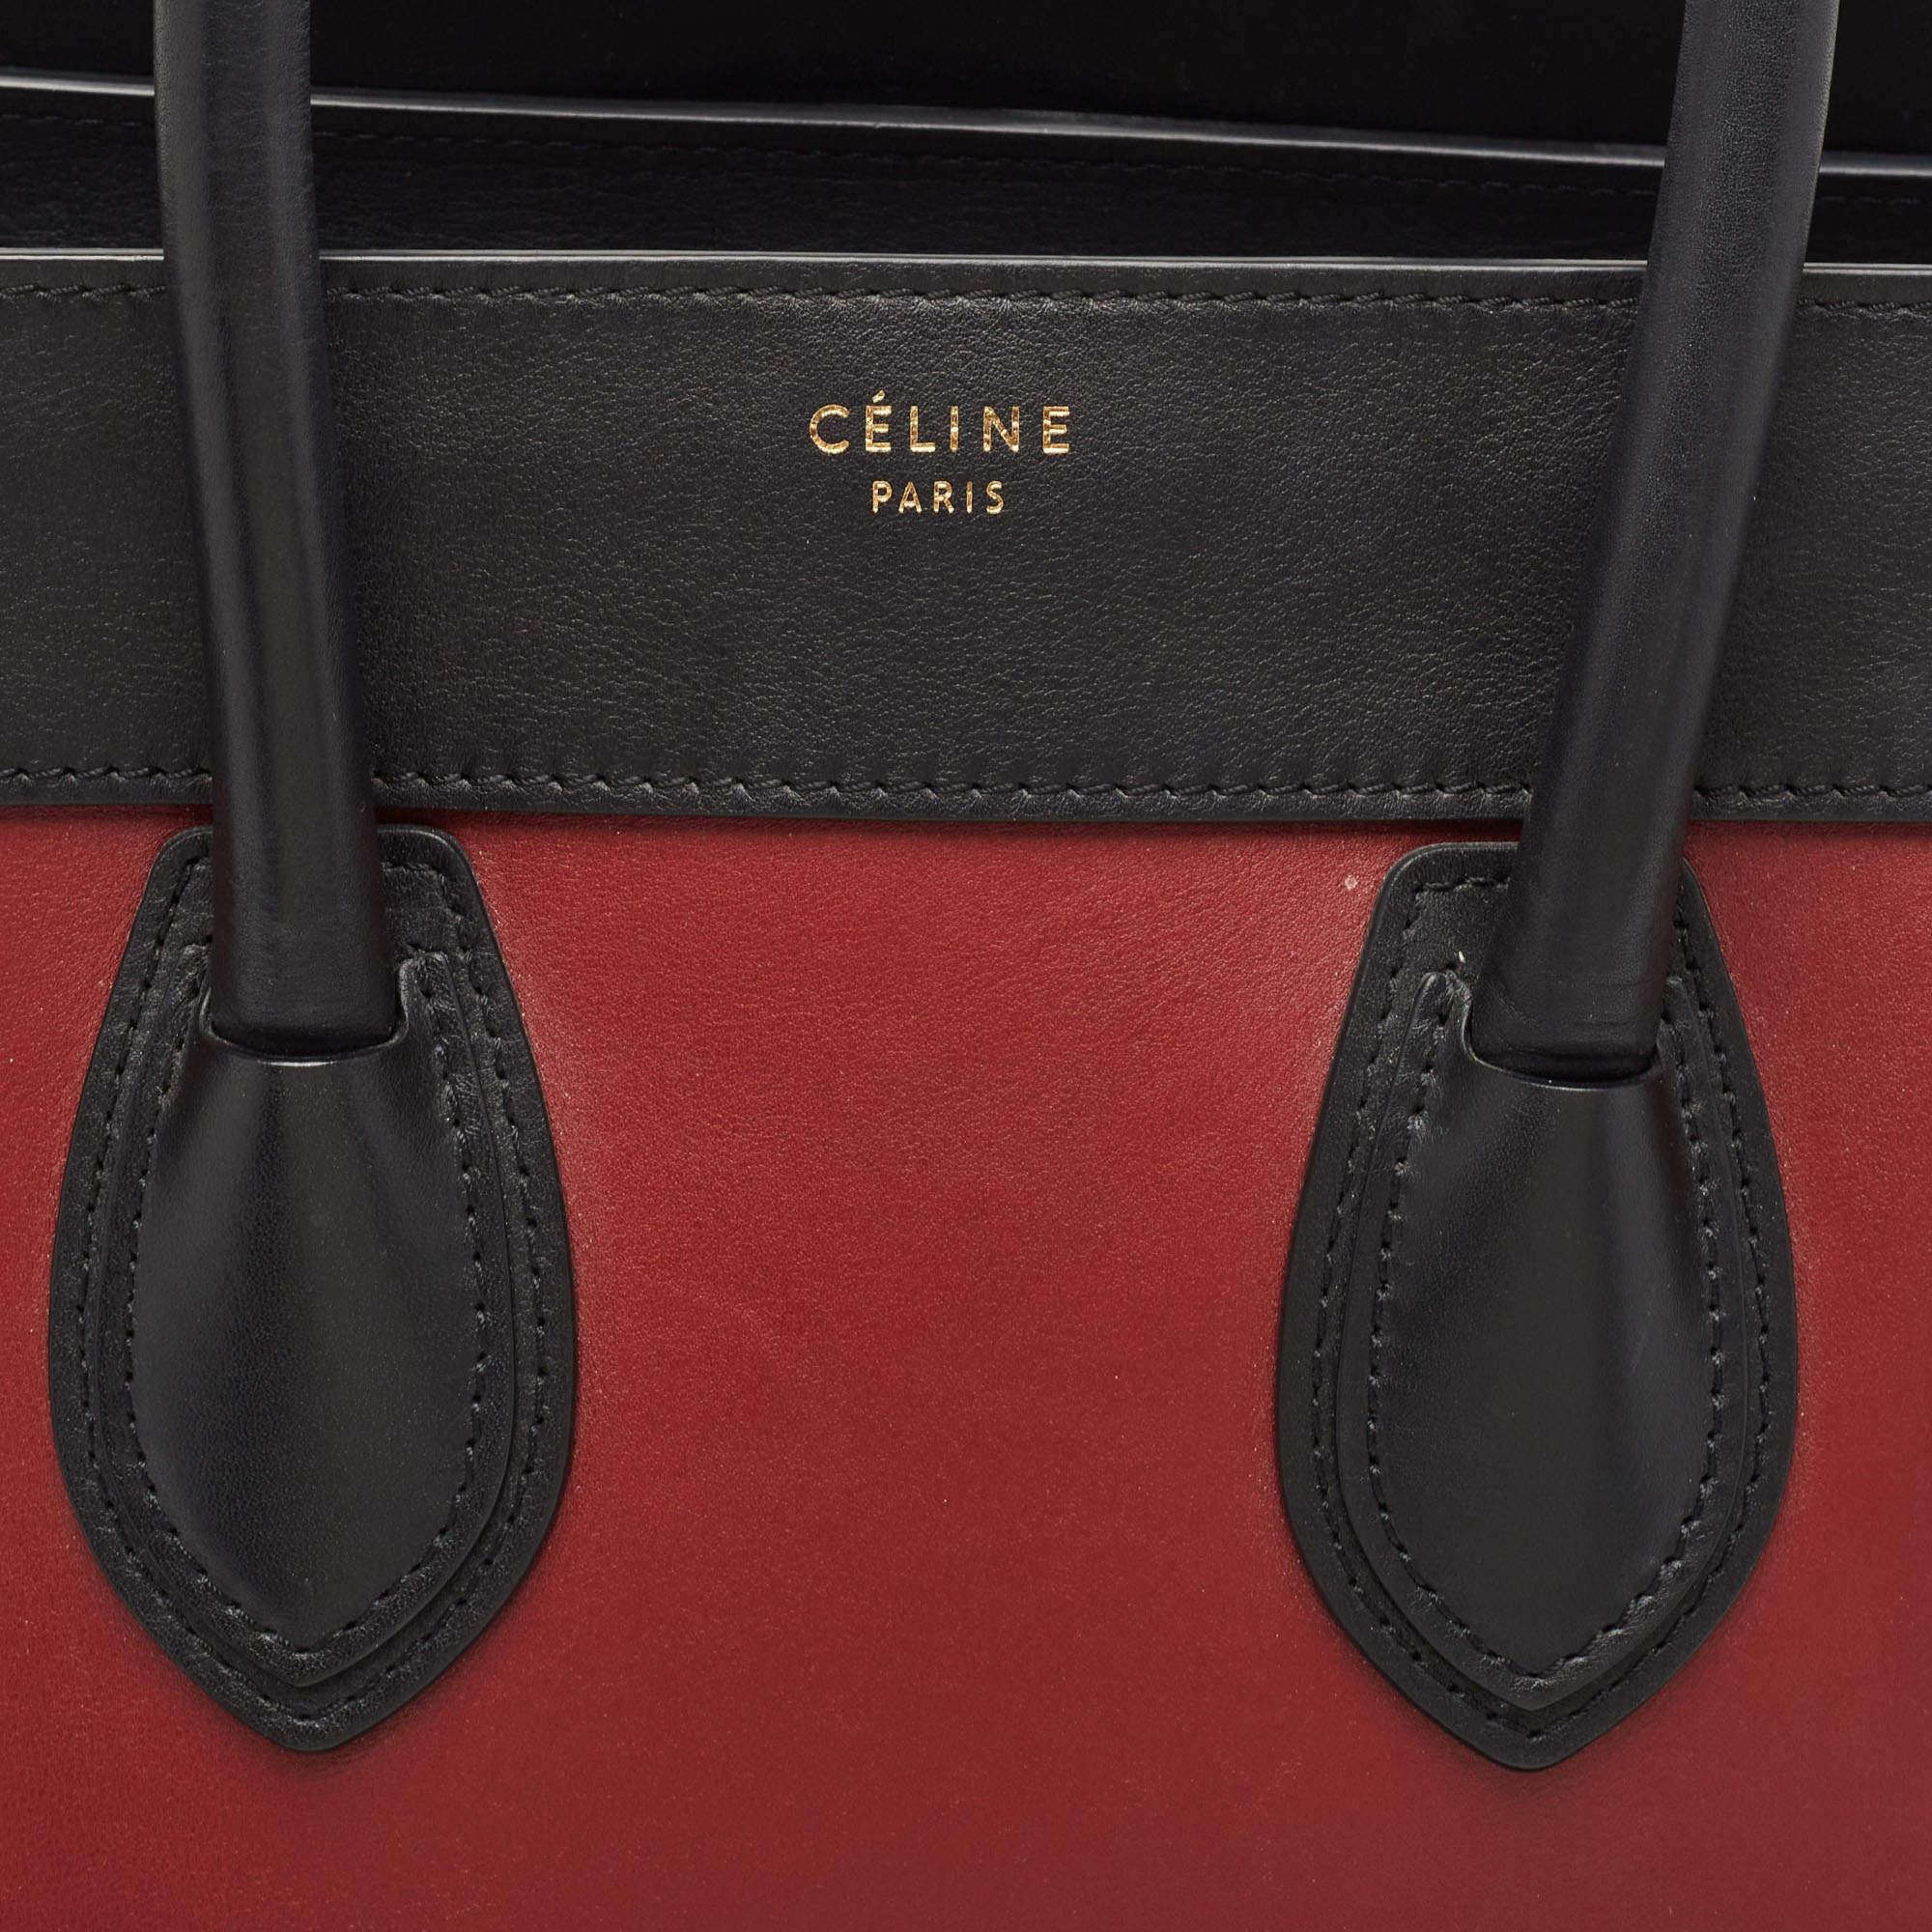 Celine Tricolor Leather and Suede Mini Luggage Tote For Sale 6